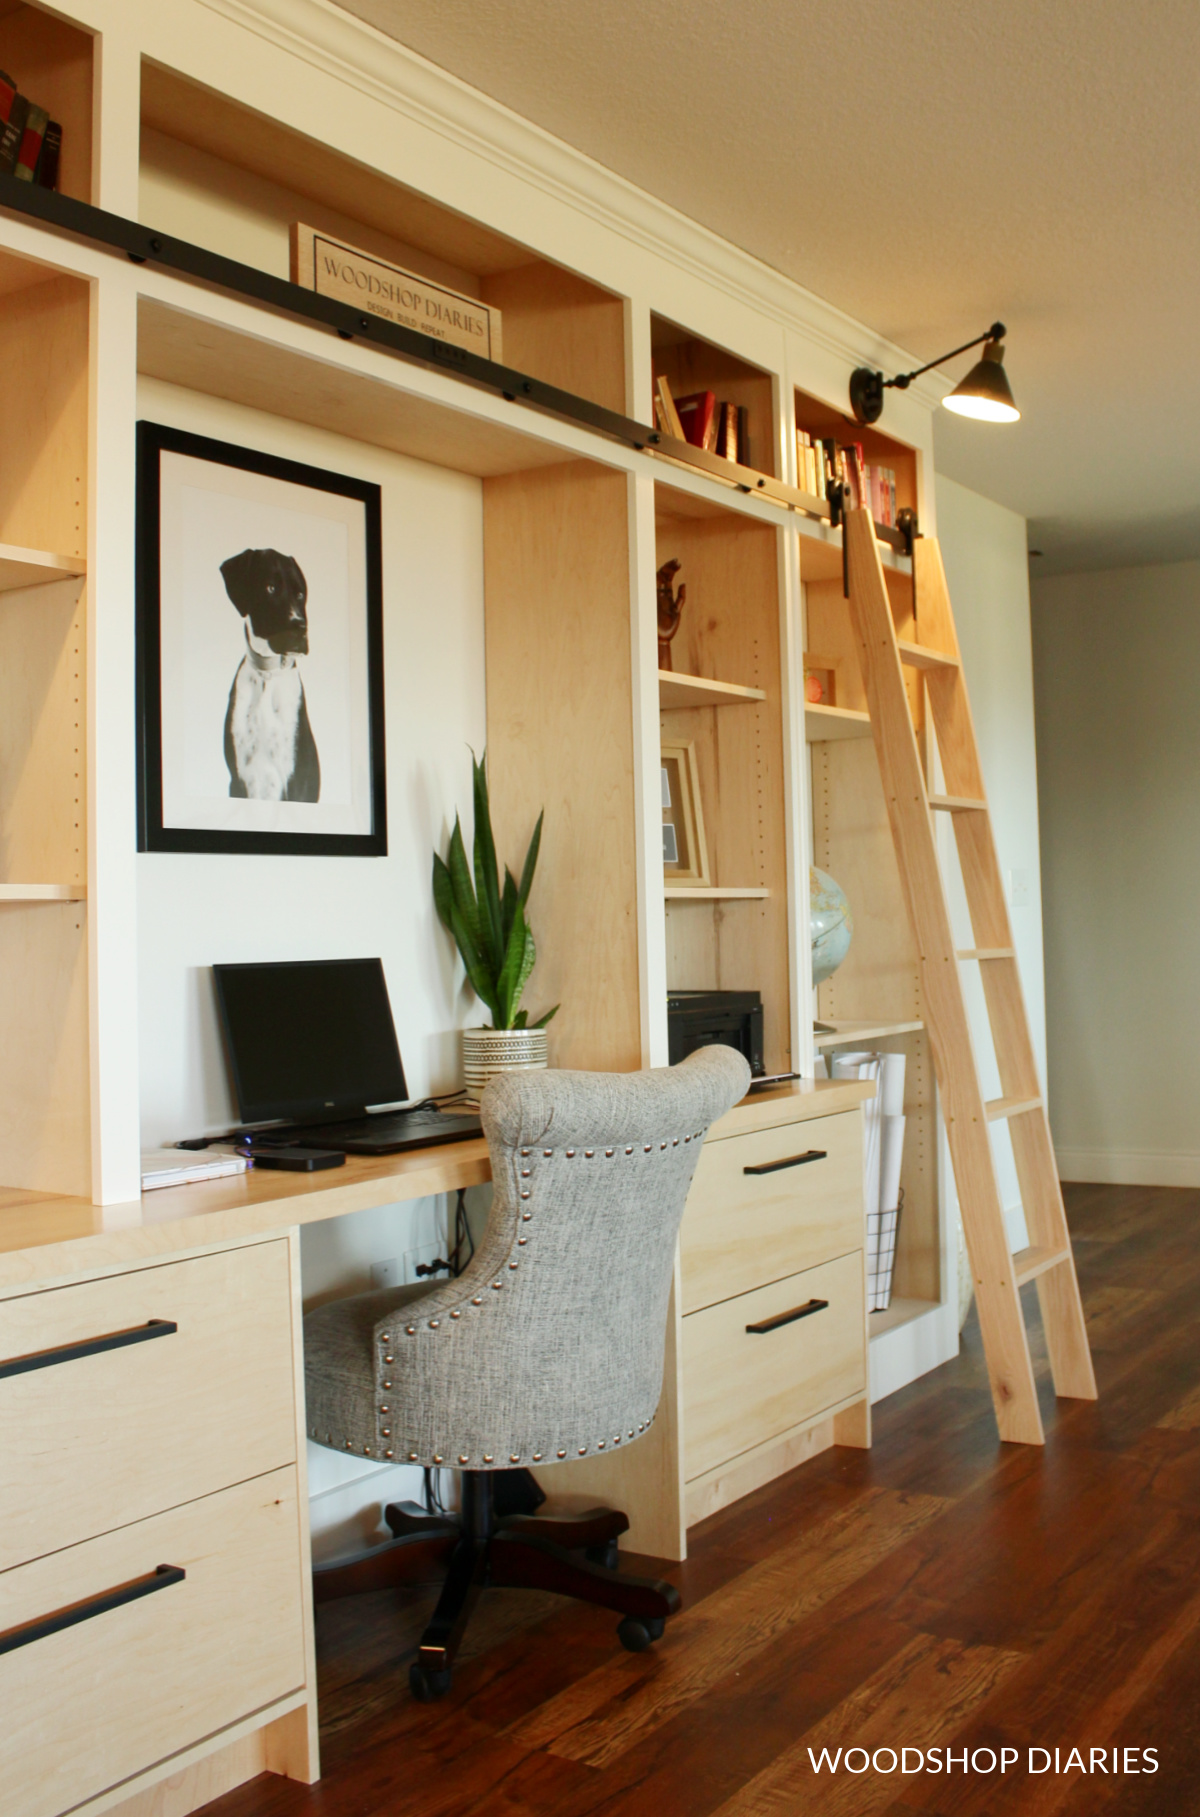 Wood and white painted library bookshelf with rolling ladder and desk in living room space